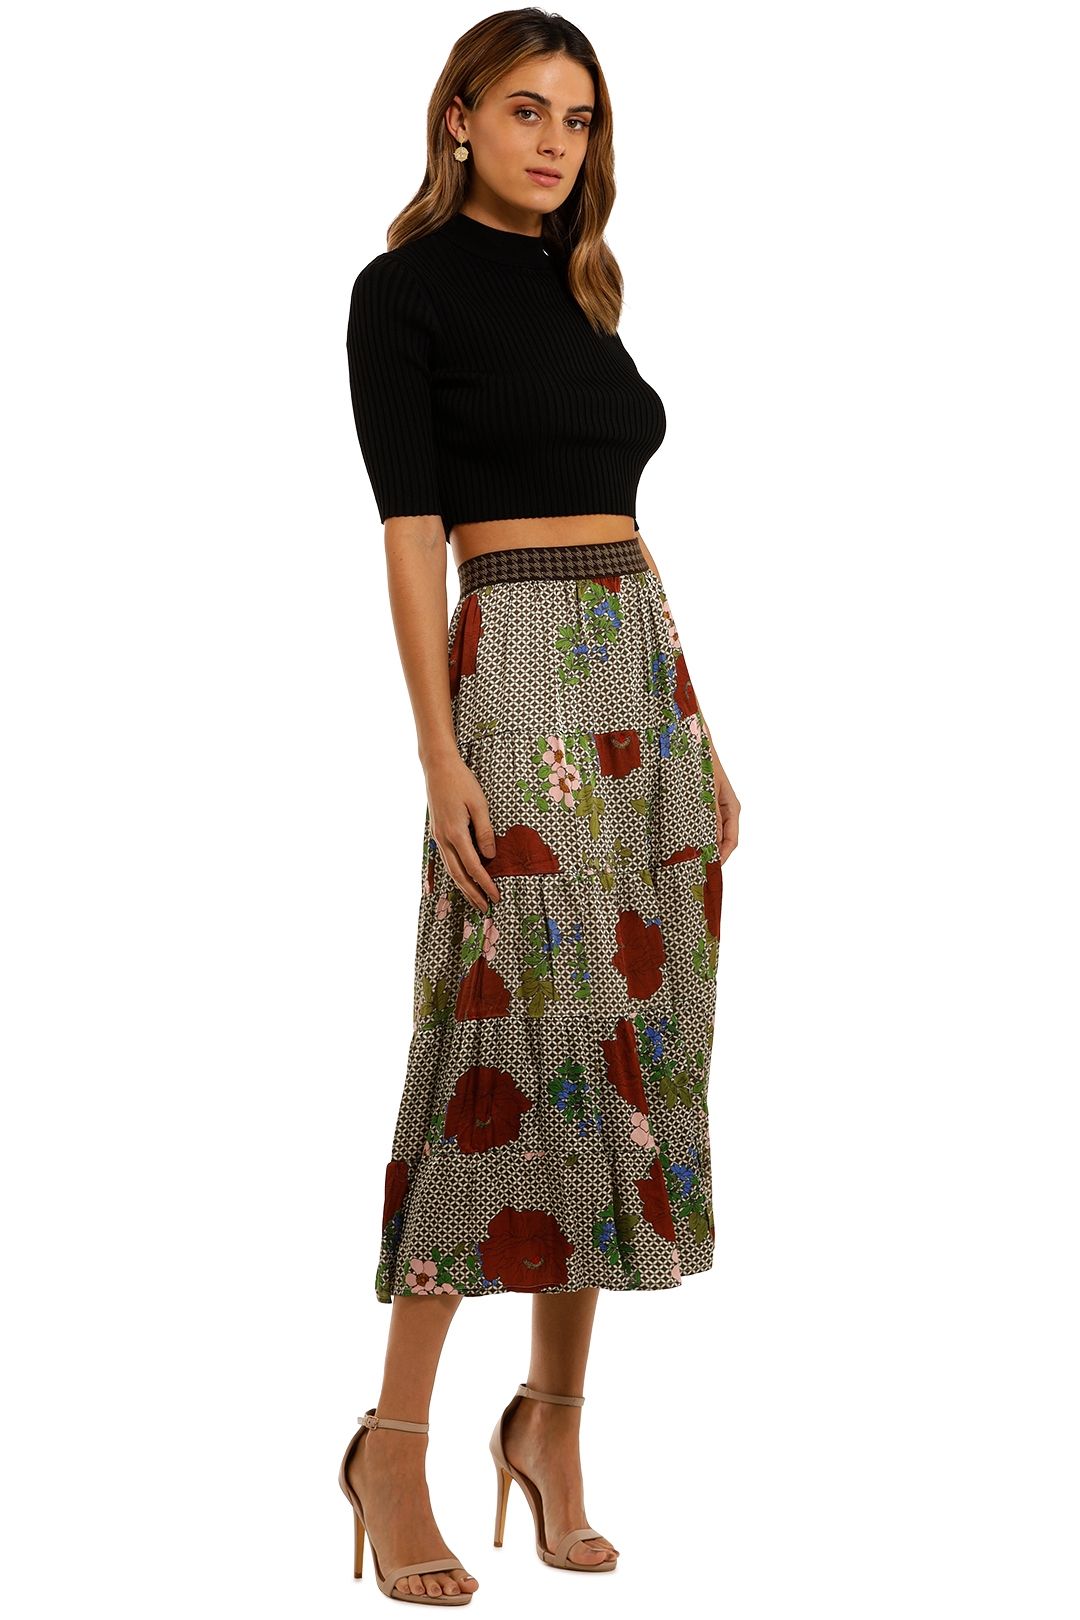 Curate by Trelise Cooper The Last Layer Skirt floral